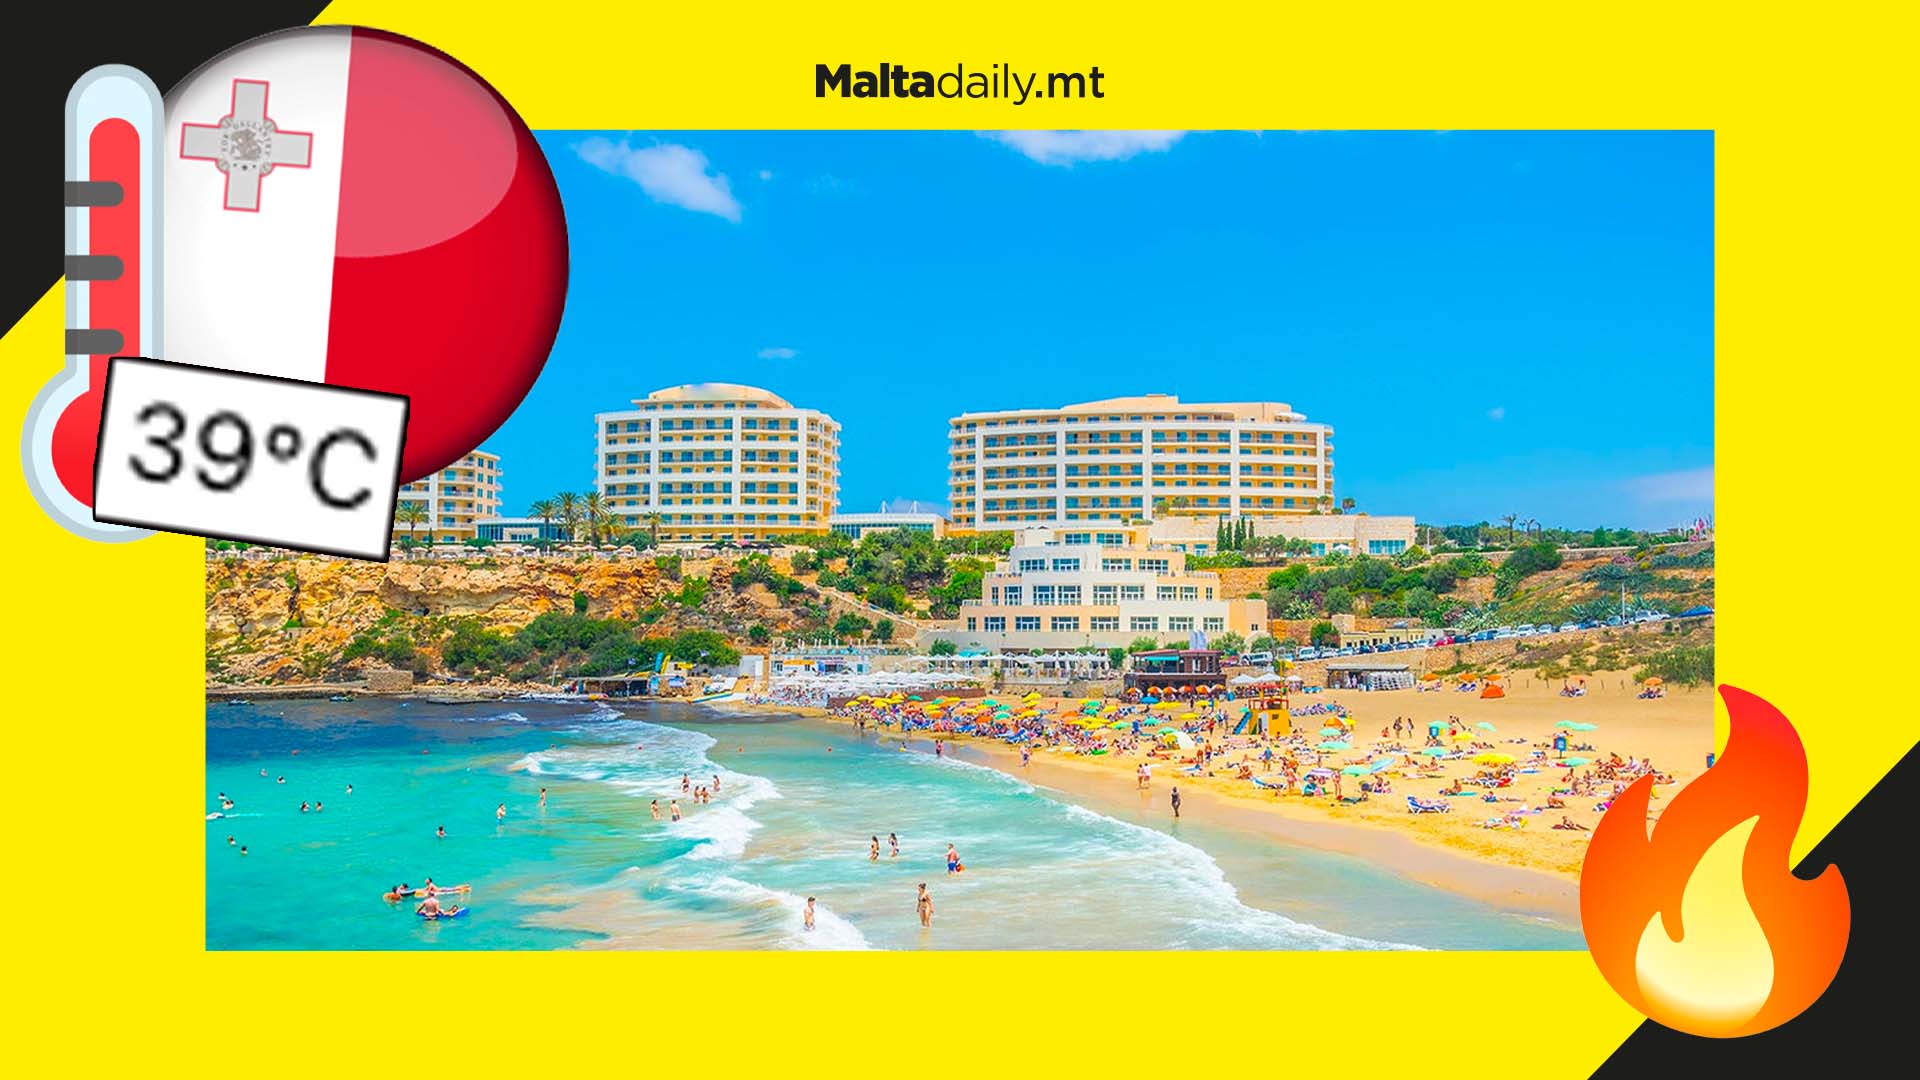 June 2022 was the hottest Maltese summer in 100 years